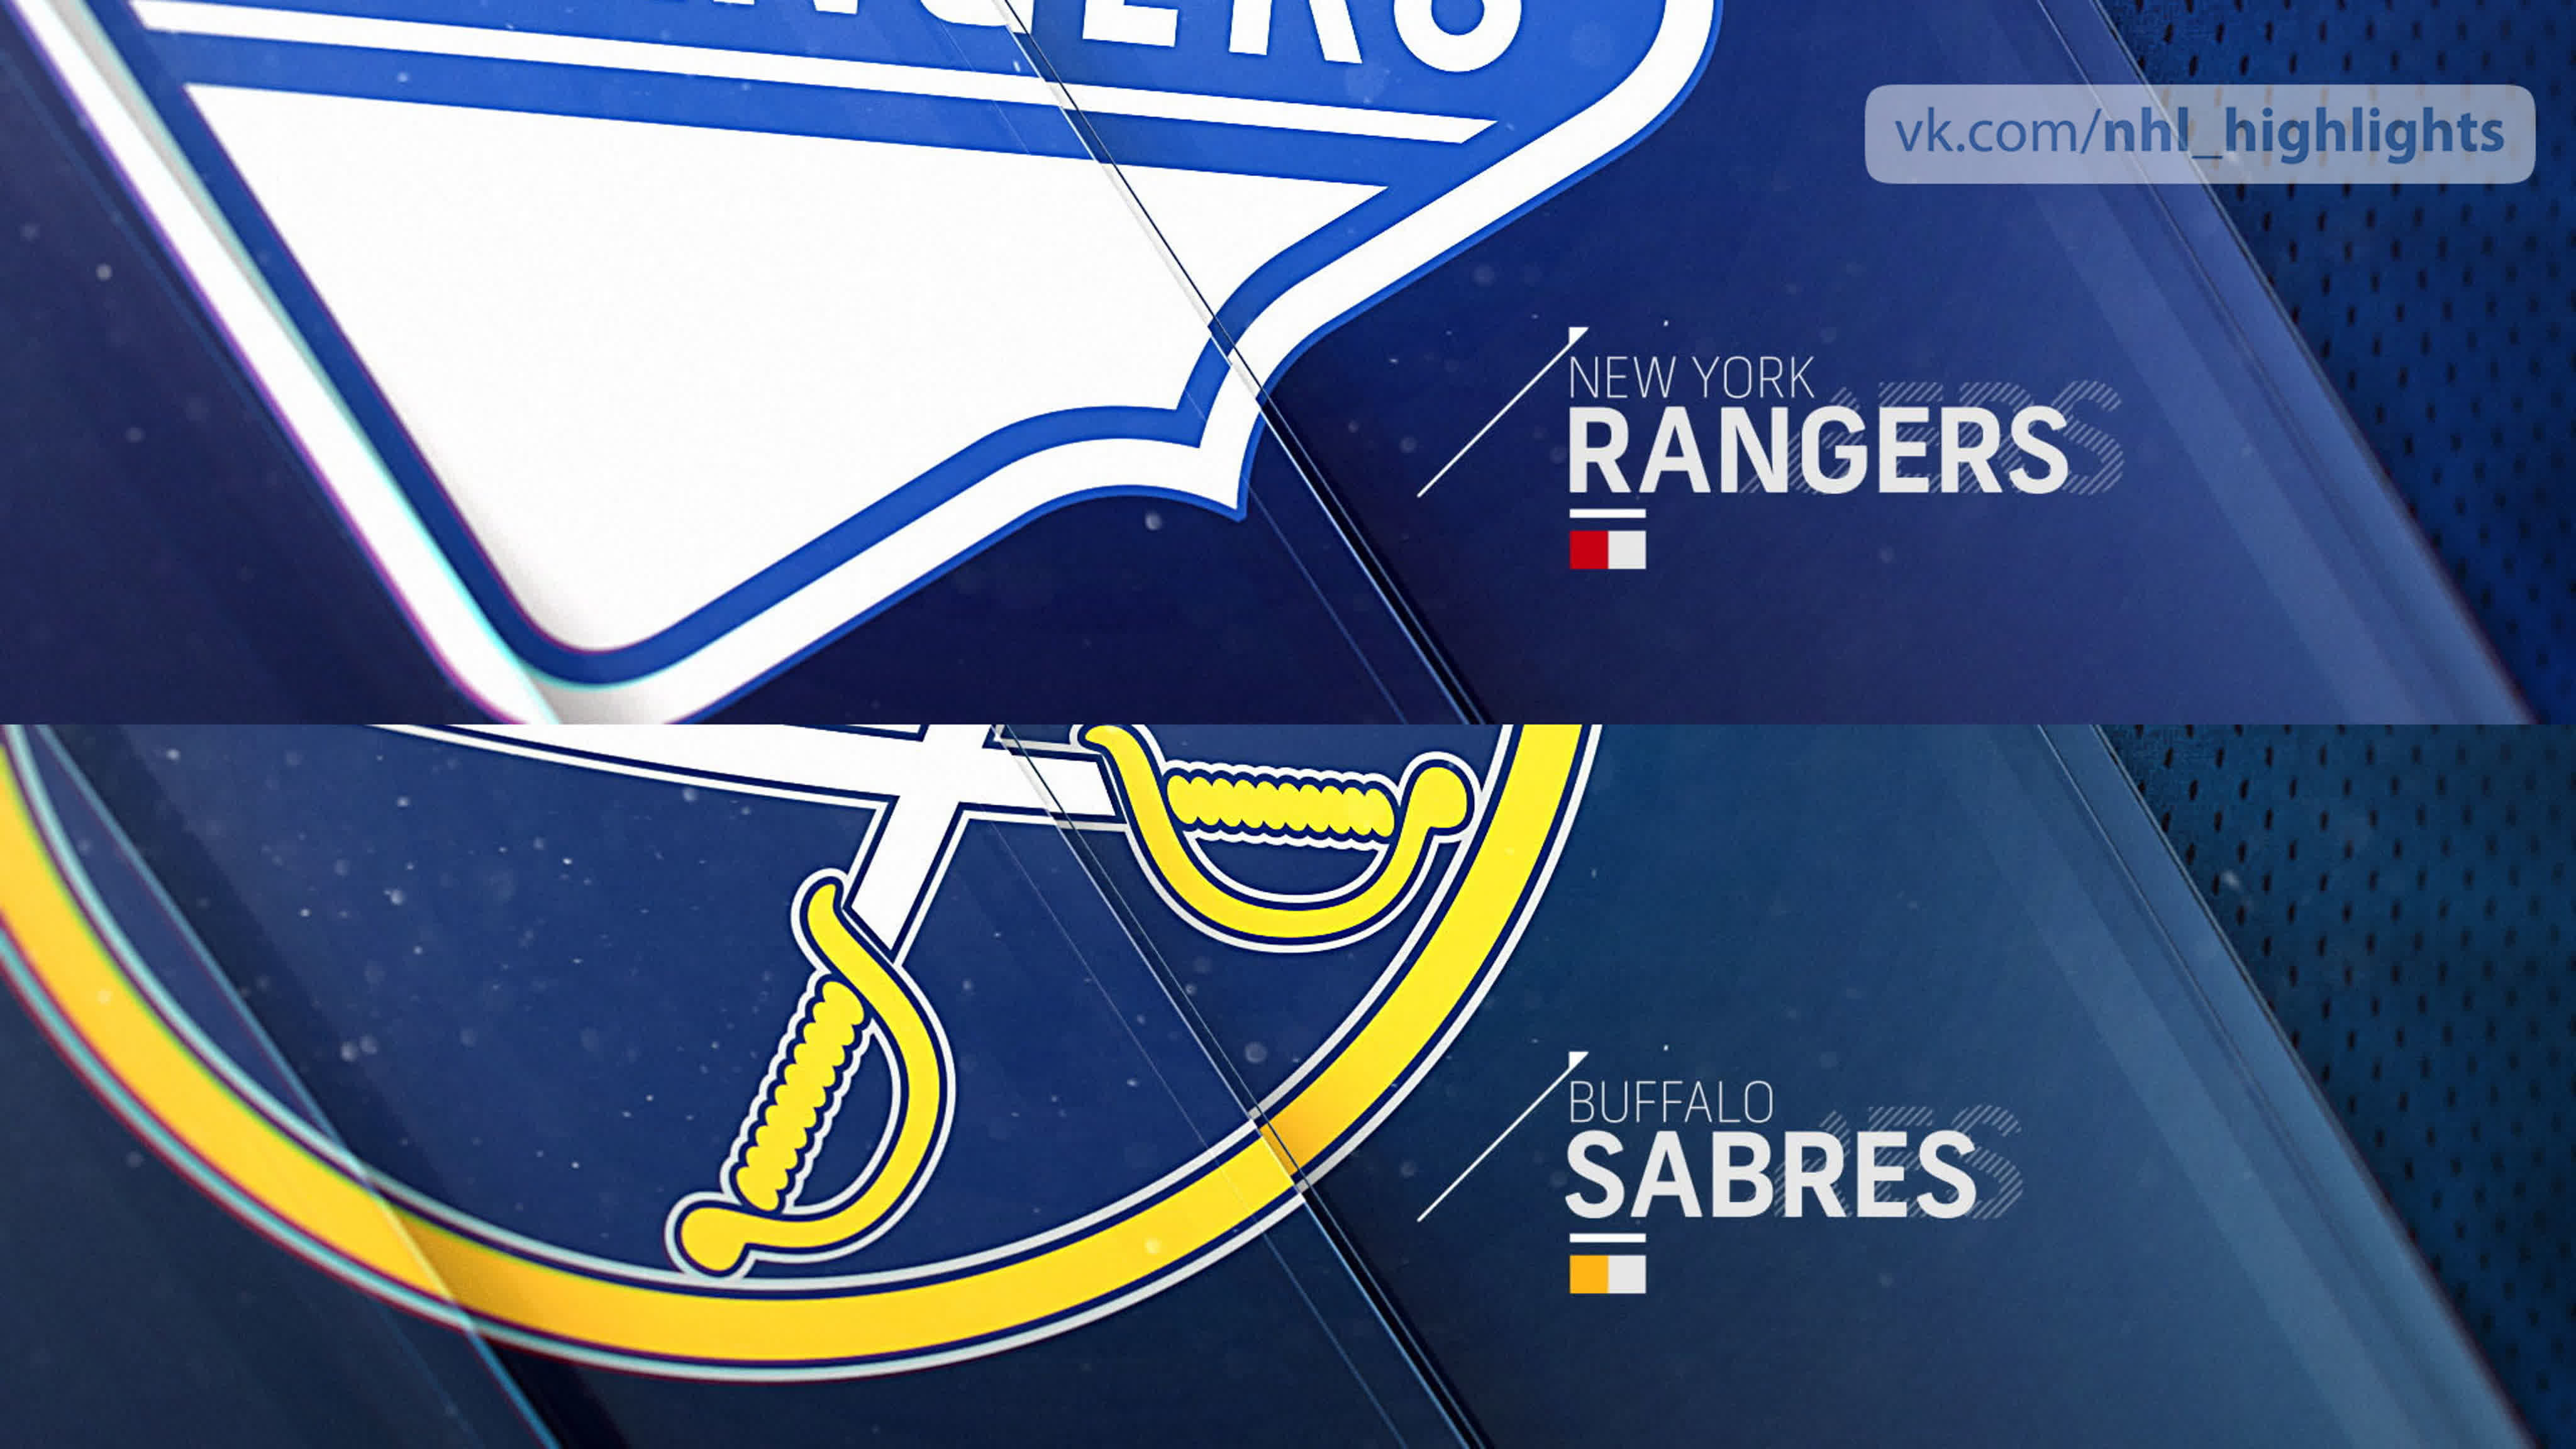 New york rangers vs buffalo sabres apr 3, 2021 highlights picture